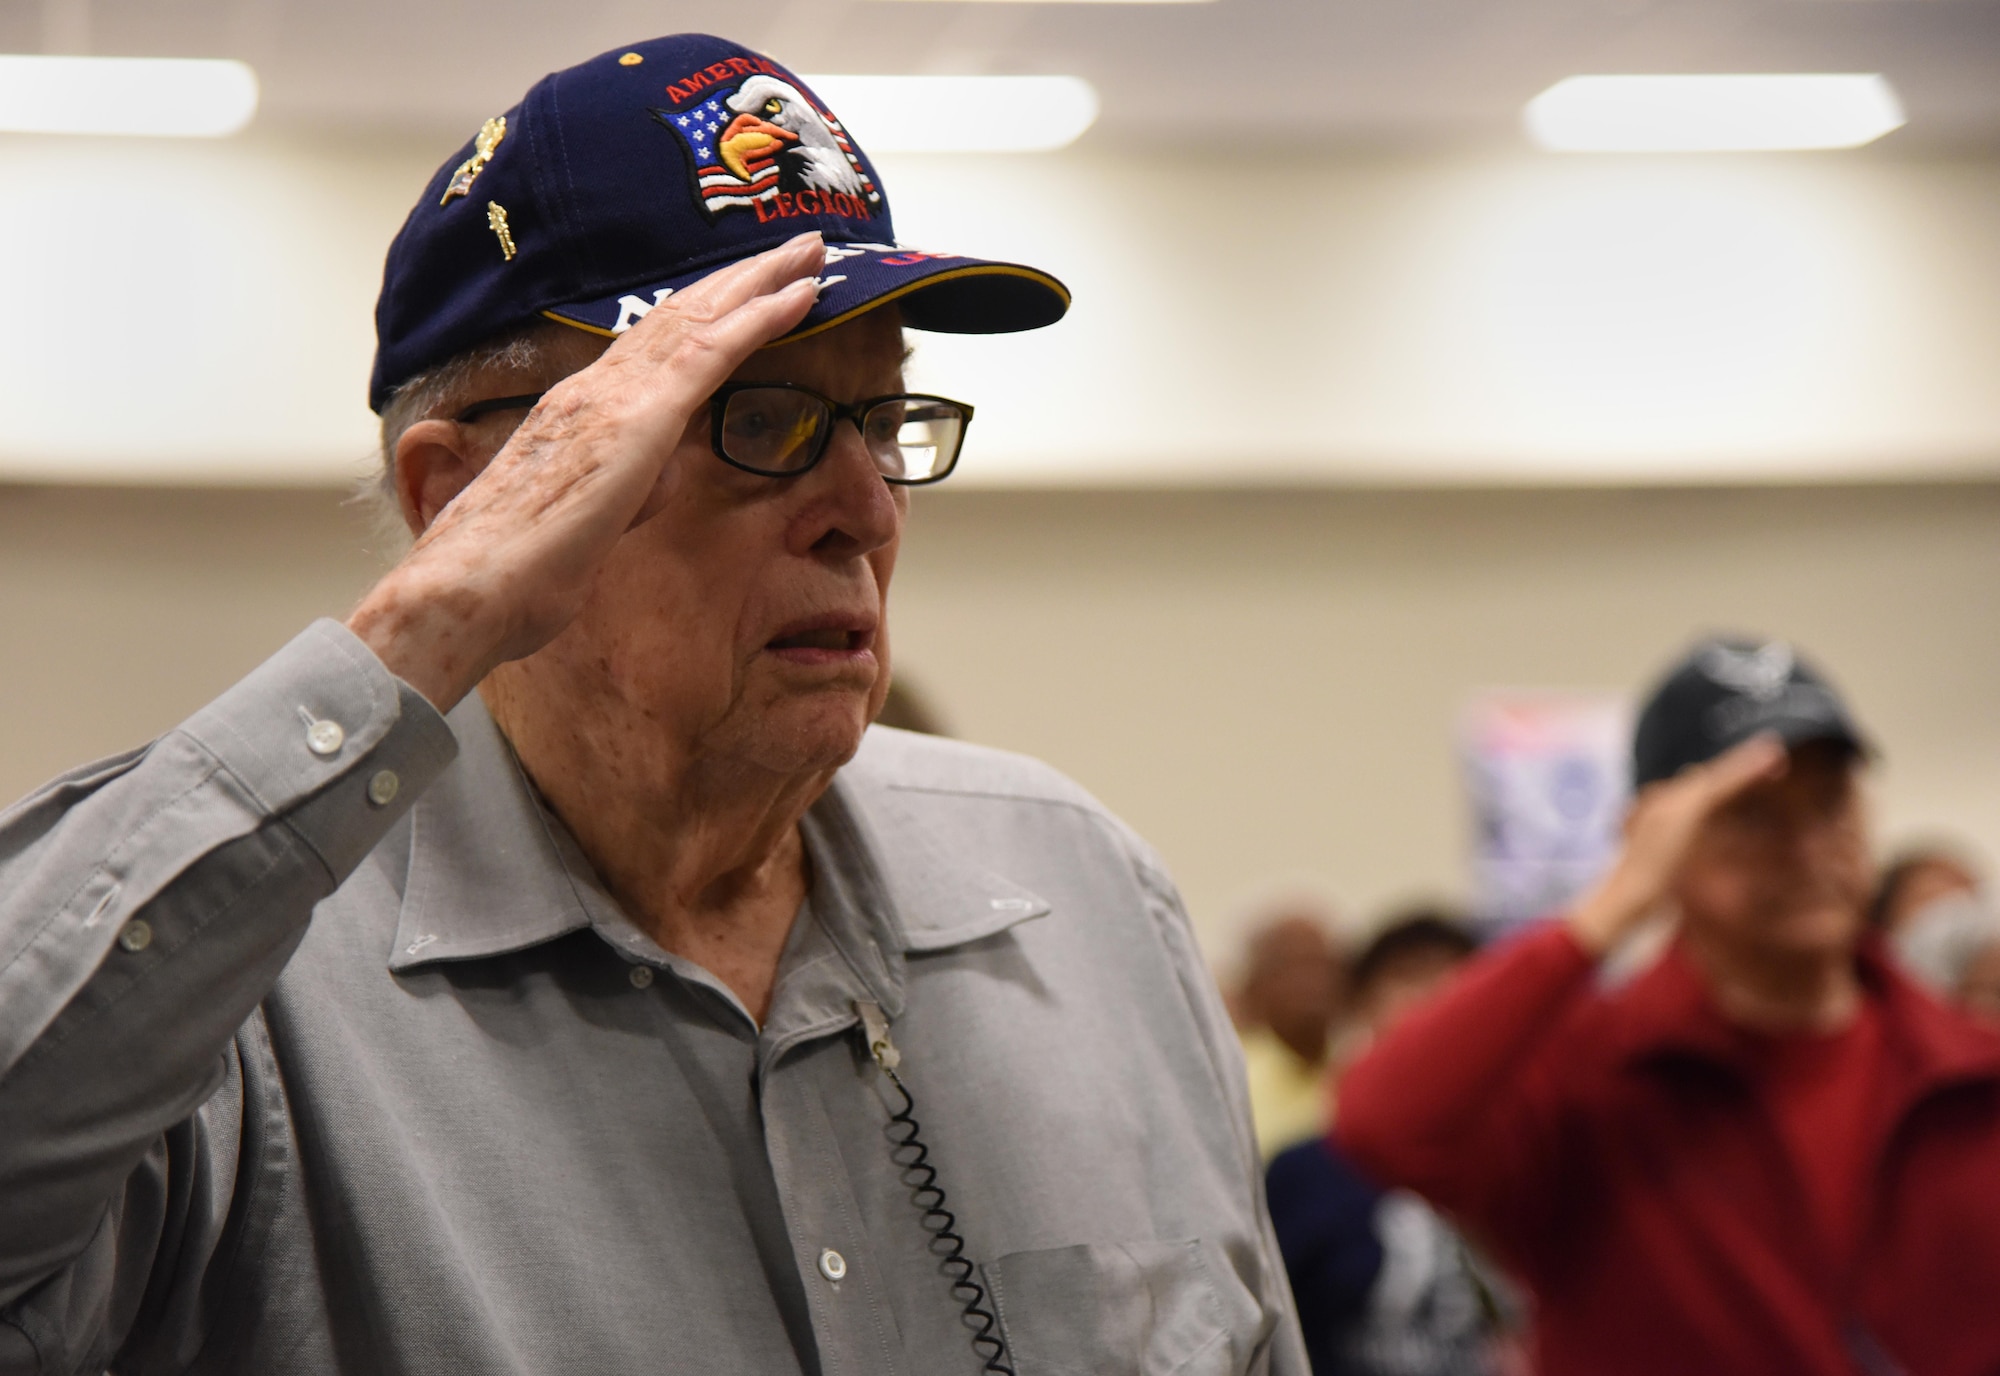 U.S. Navy retired Chief Kenneth Schneider renders a salute during the singing of the national anthem during Retiree Appreciation Day at the Roberts Consolidated Aircraft Maintenance Facility Nov. 4, 2016, on Keesler Air Force Base, Miss. The annual event, sponsored by the Keesler Retiree Activities Office, included more than 20 displays with information pertinent to retirees and a free lunch. (U.S. Air Force photo by Kemberly Groue/Released)